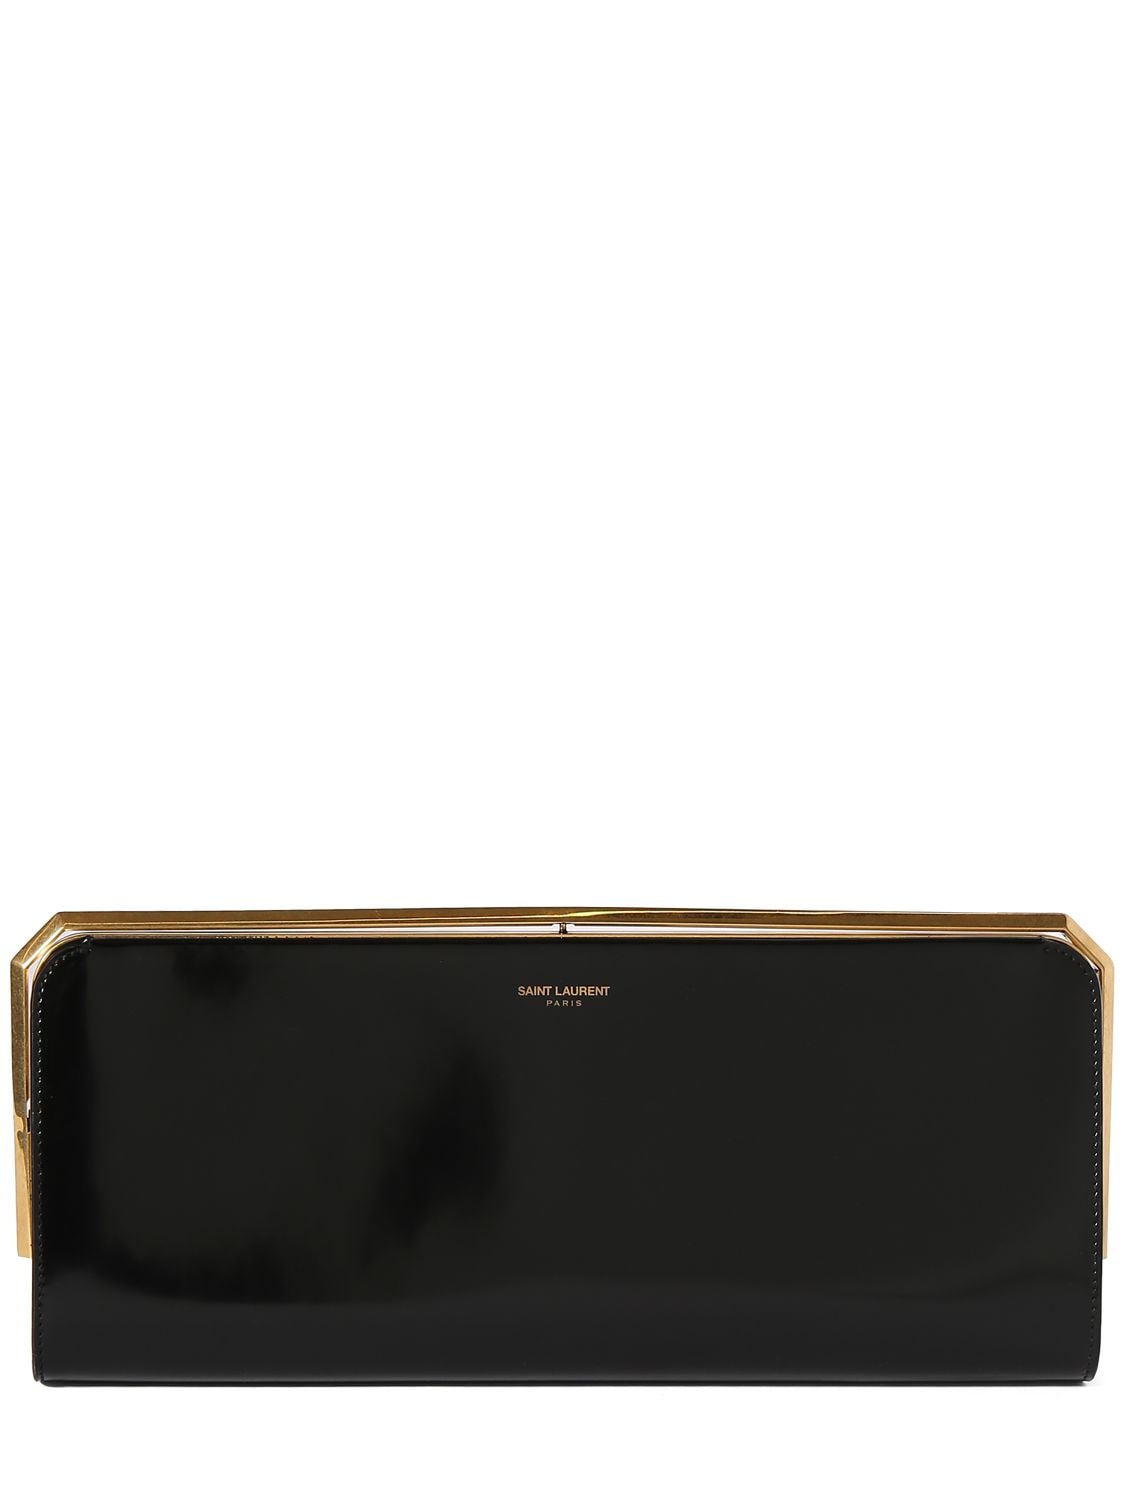 SAINT LAURENT DATE MINAUDIERE BRUSHED LEATHER CLUTCH